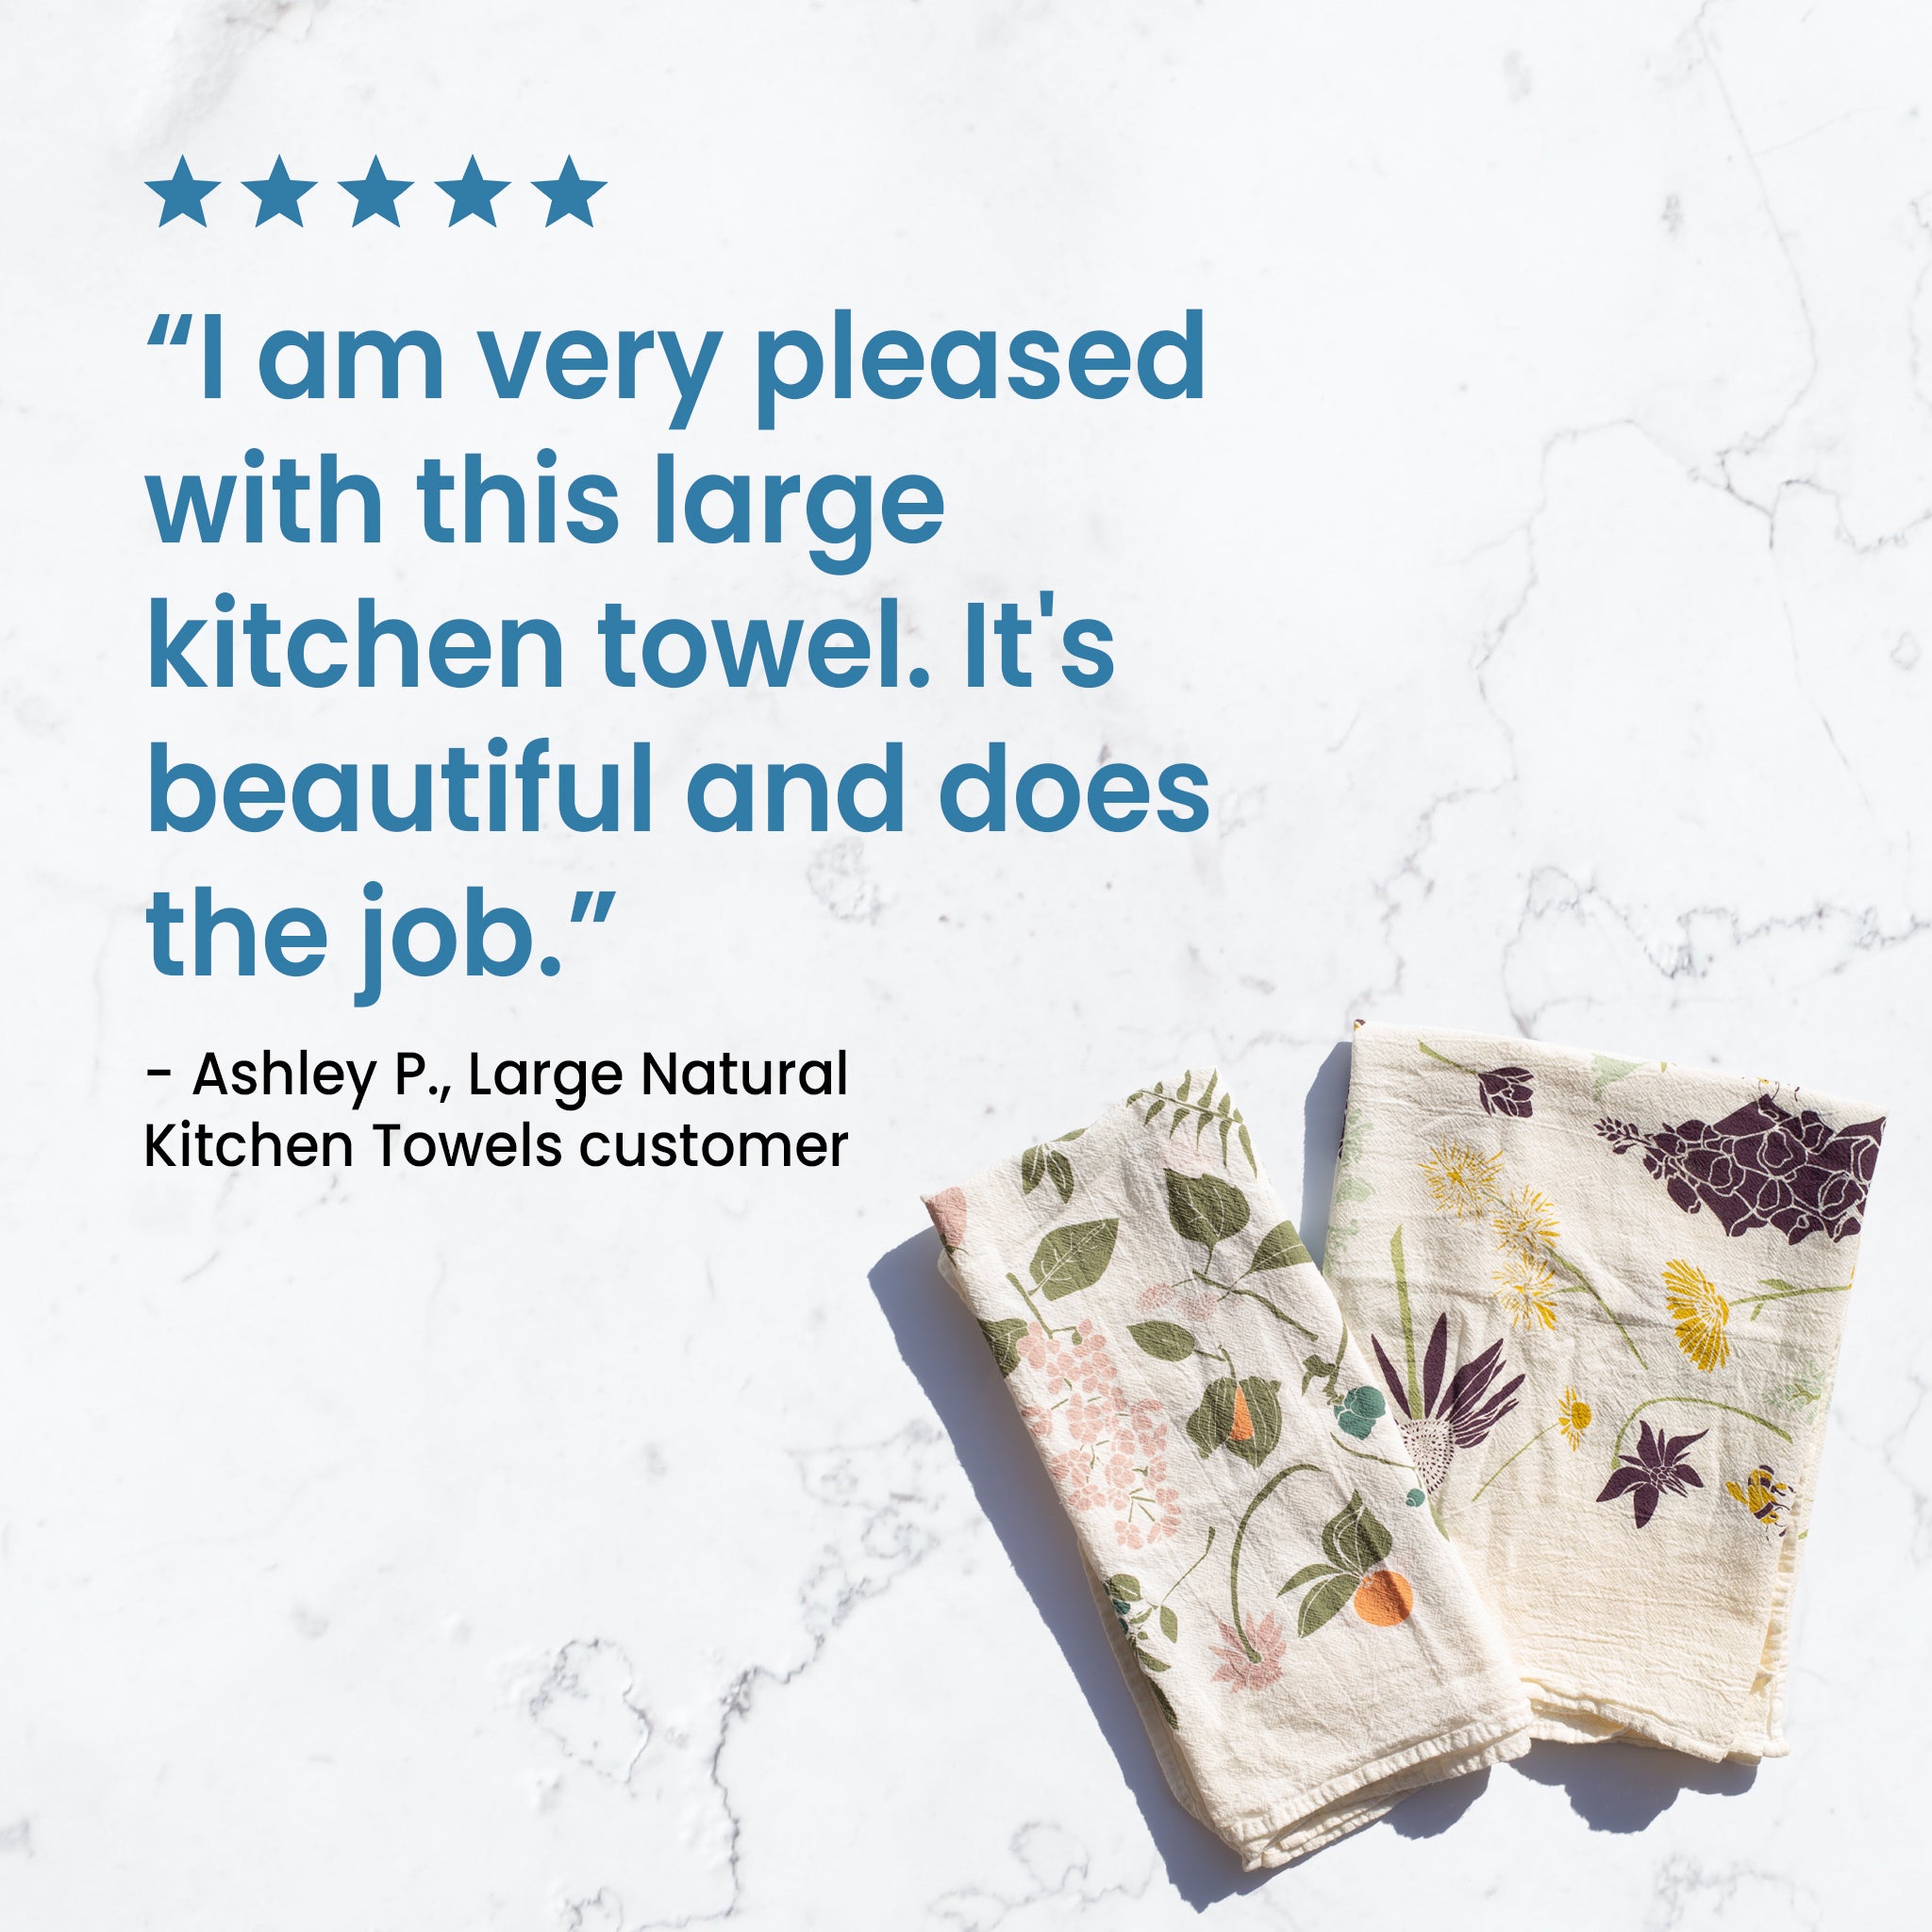 Over 14,600  Shoppers Swear by These 'Soft and Fluffy' Kitchen Towels  That Are Now 40% Off